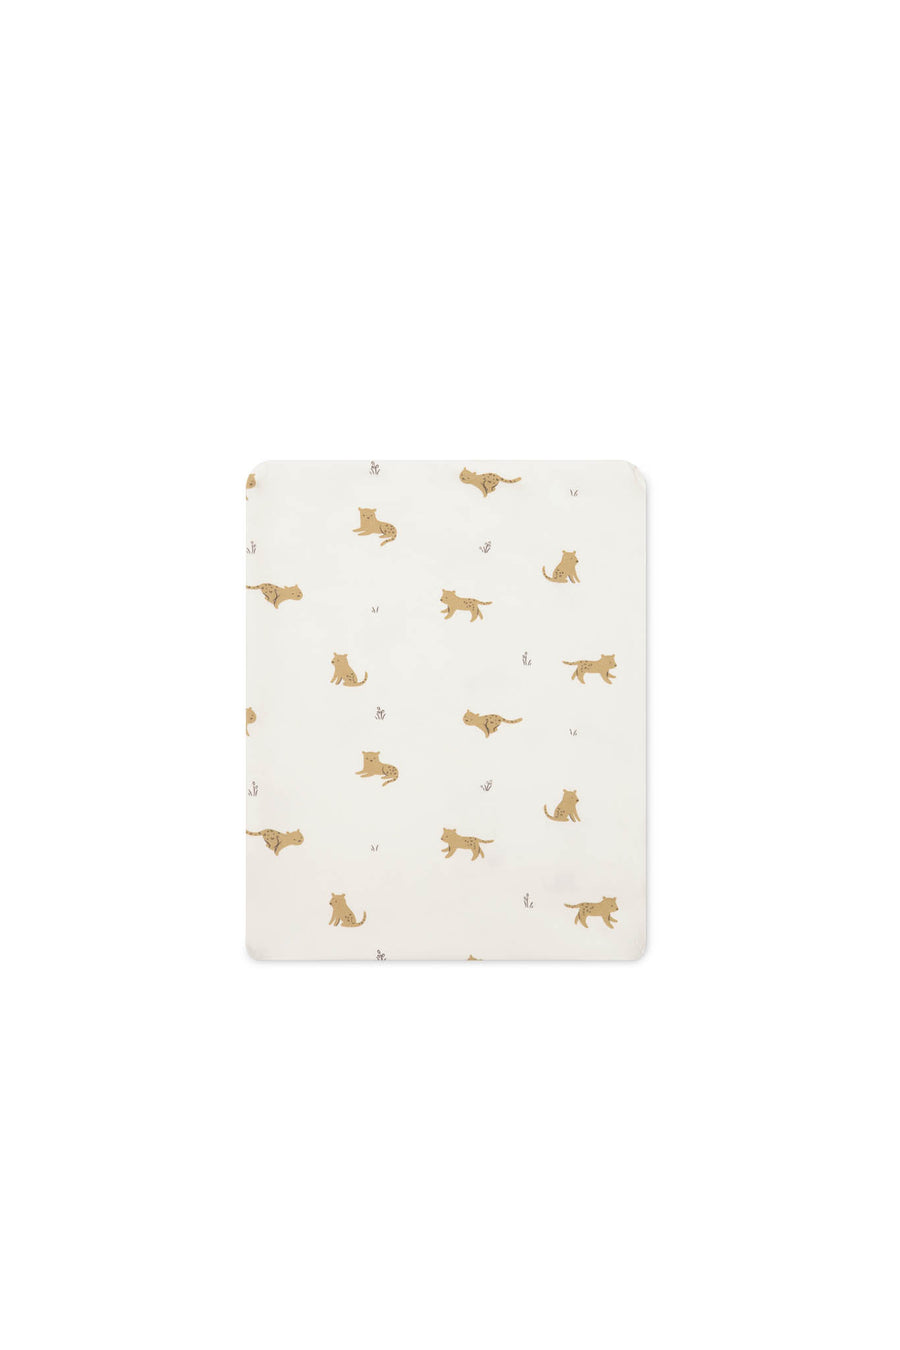 Organic Cotton Cot Sheet - Lenny Leopard Cloud Childrens Bedding from Jamie Kay NZ